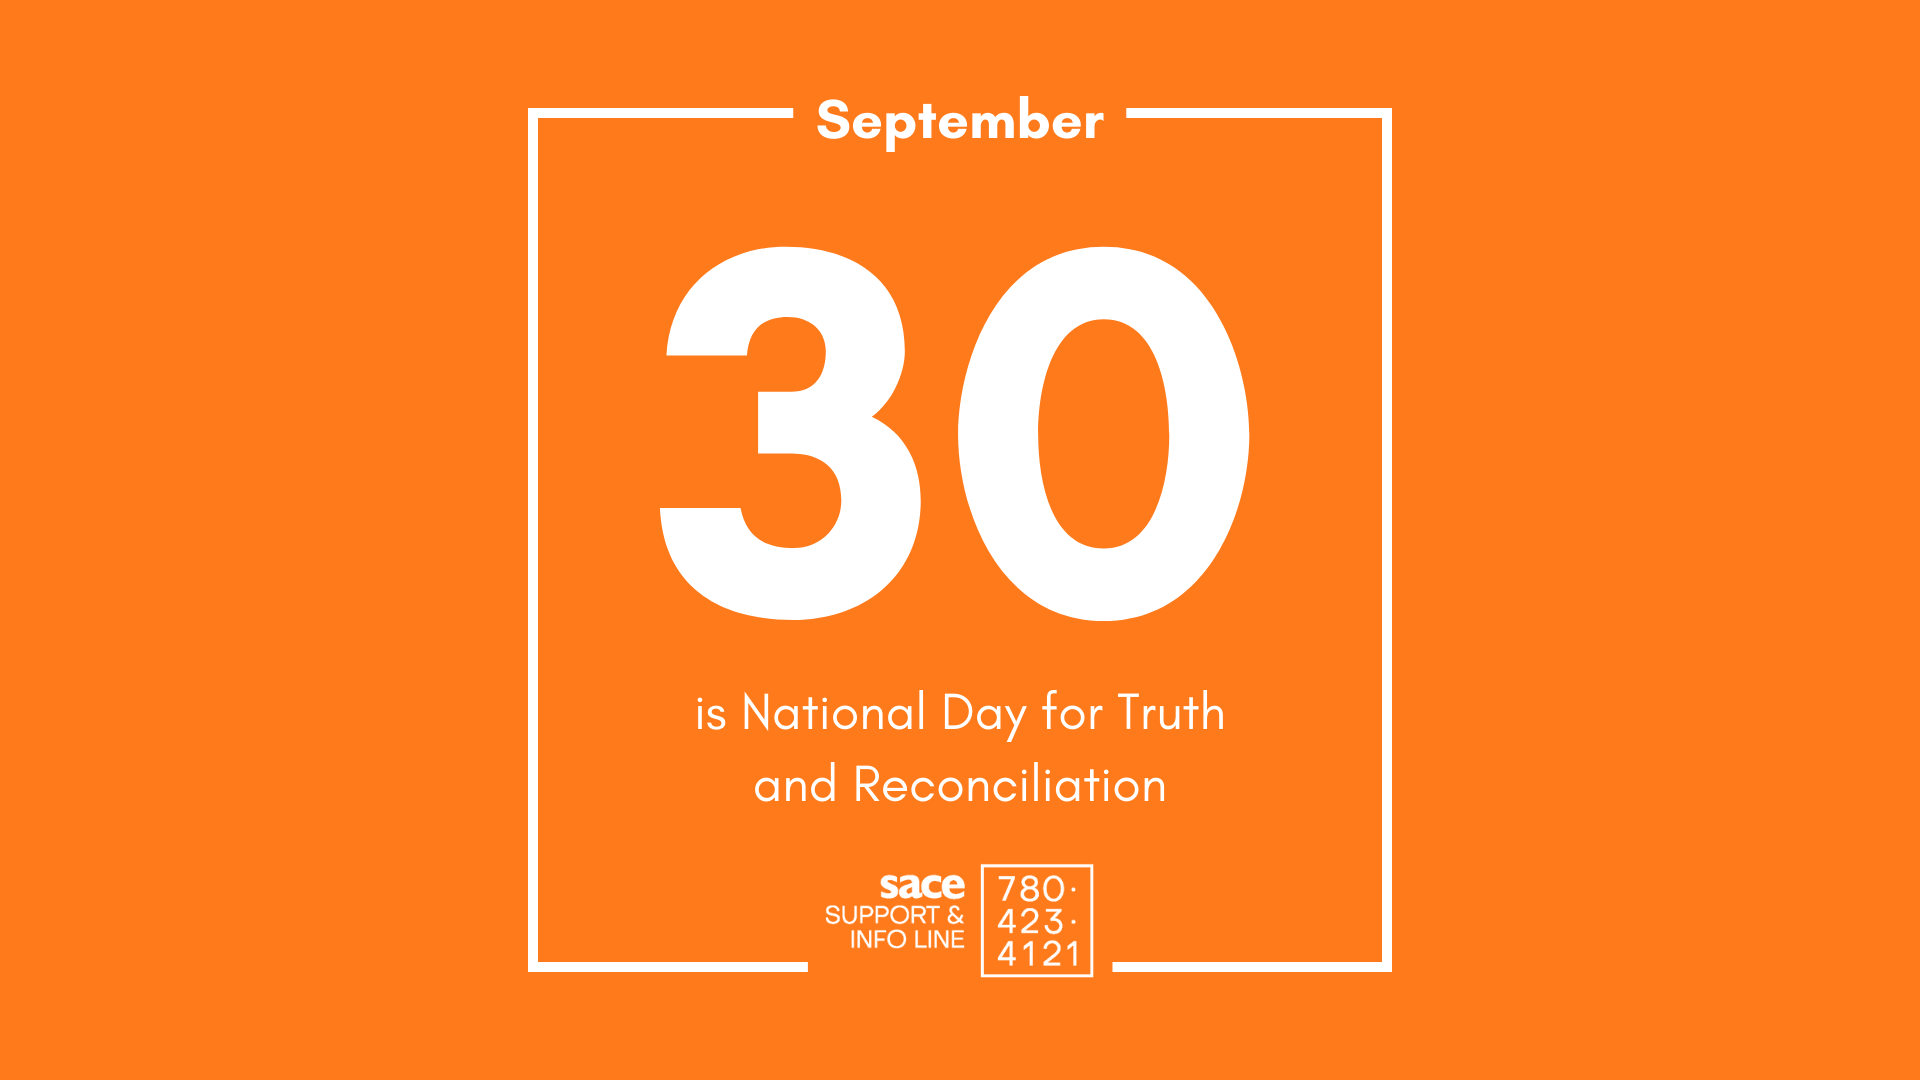 An orange background with white border and text that reads "September 30 National Day of Truth and Reconciliation" with the SACE Support & Information Line logo